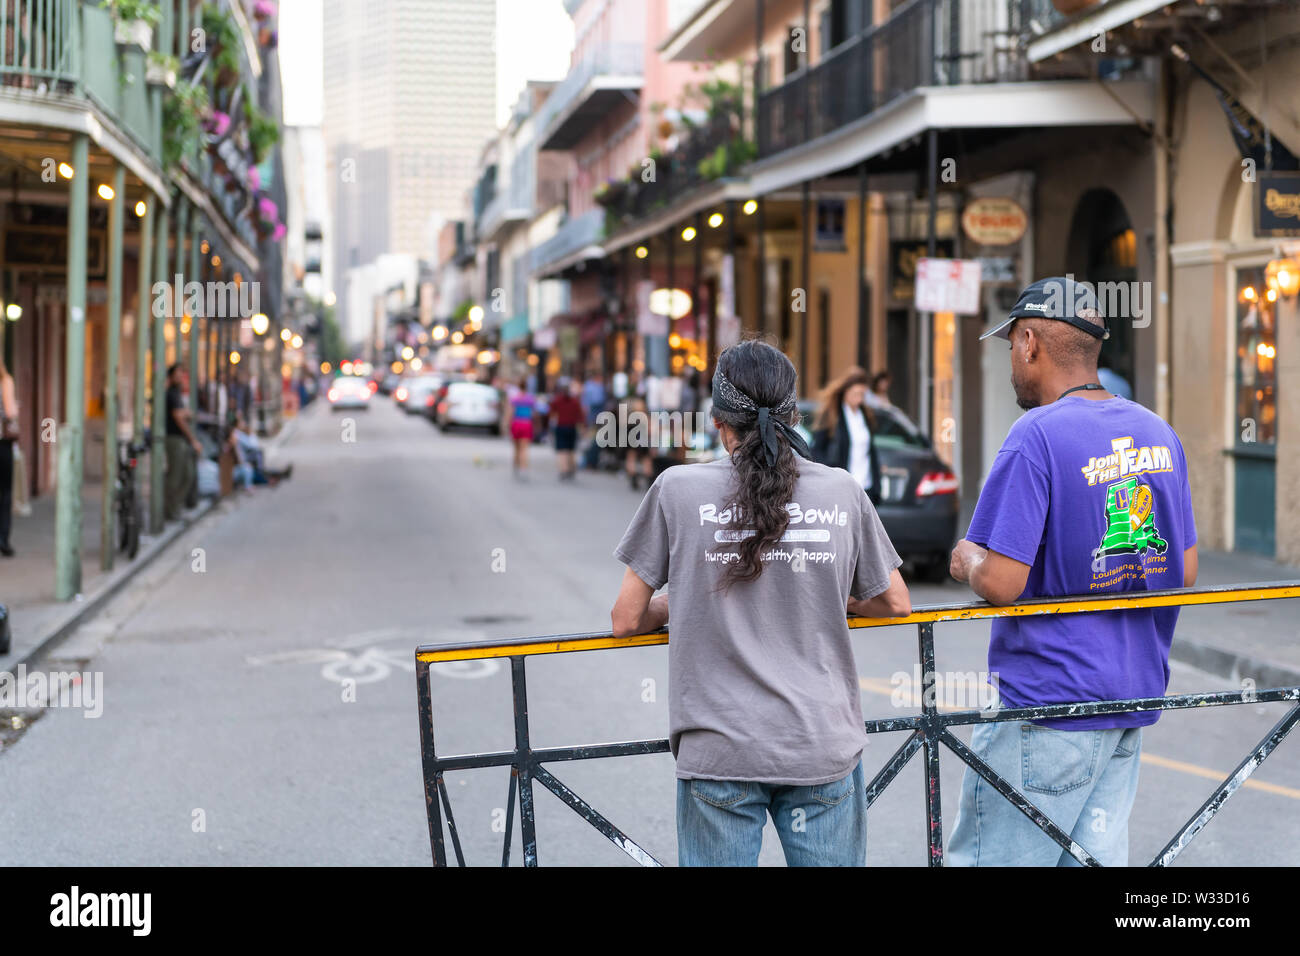 New Orleans, USA - April 22, 2018: Back of two local men standing on Bourbon street road in evening with people walking in blurry background in famous Stock Photo